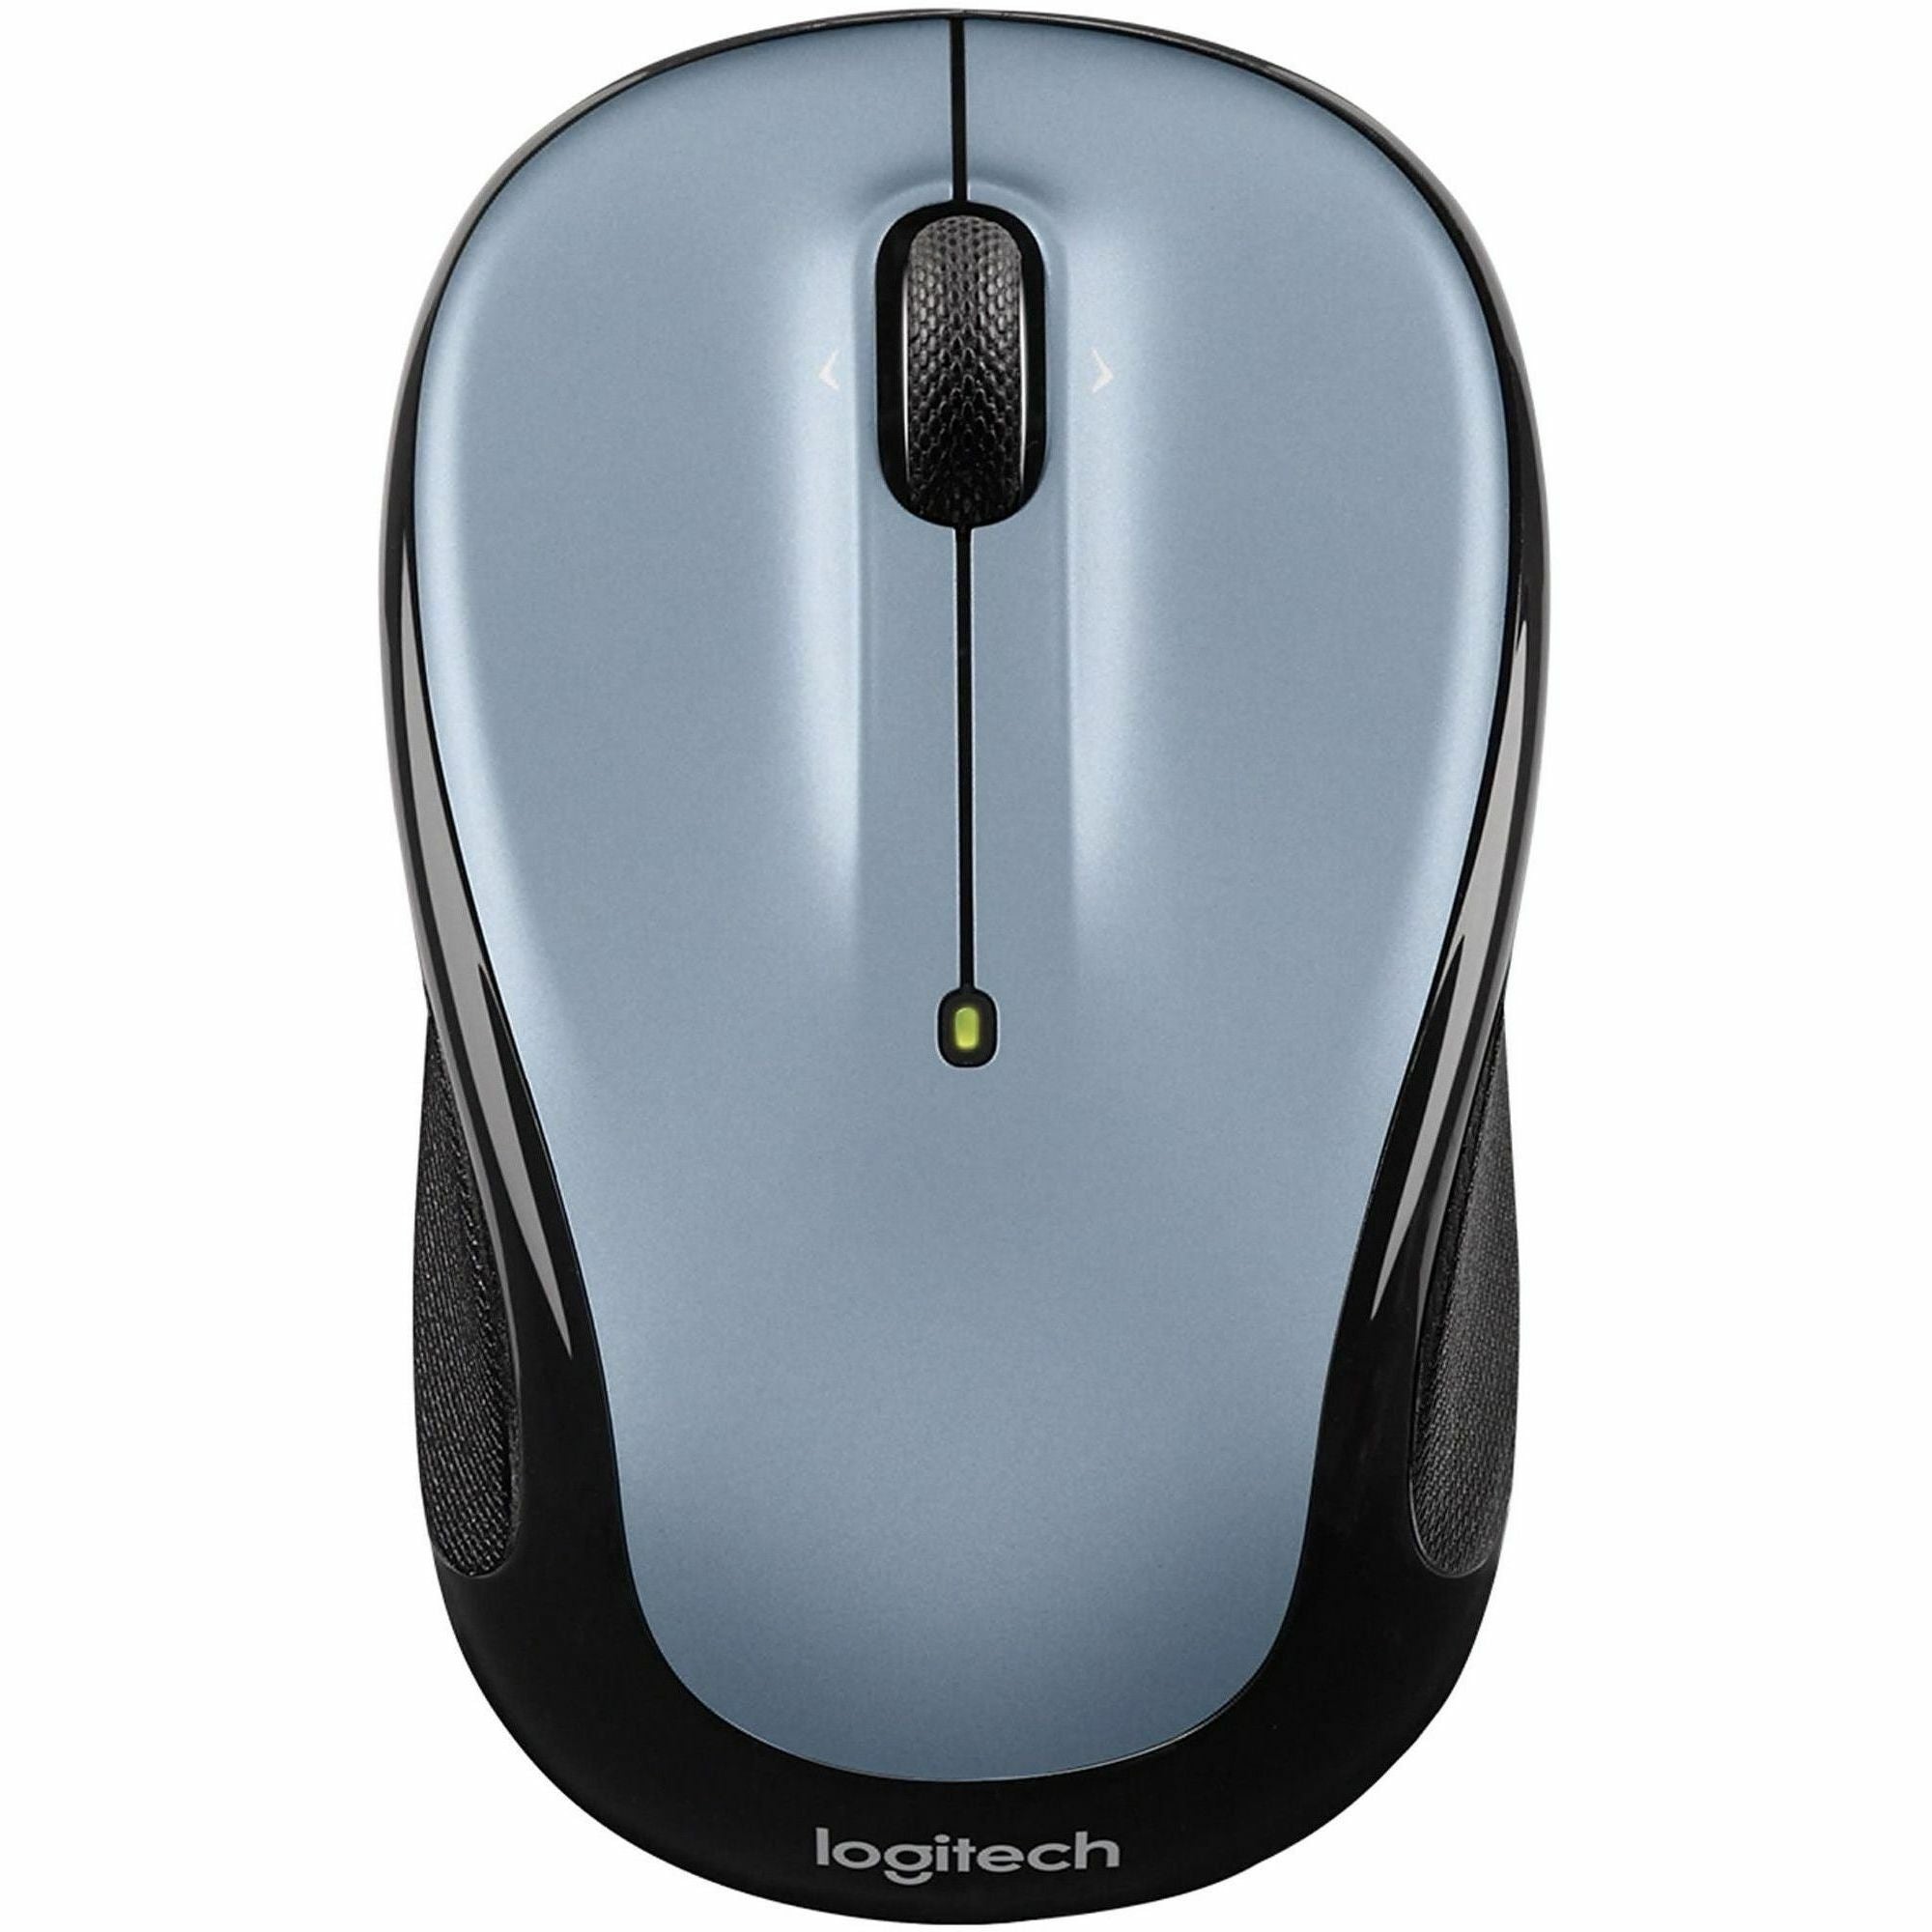 logitech-m325s-wireless-mouse-optical-wireless-radio-frequency-240-ghz-silver-usb-1000-dpi-tilt-wheel-5-buttons-3-programmable-buttons-small-hand-palm-size-symmetrical_log910006824 - 3